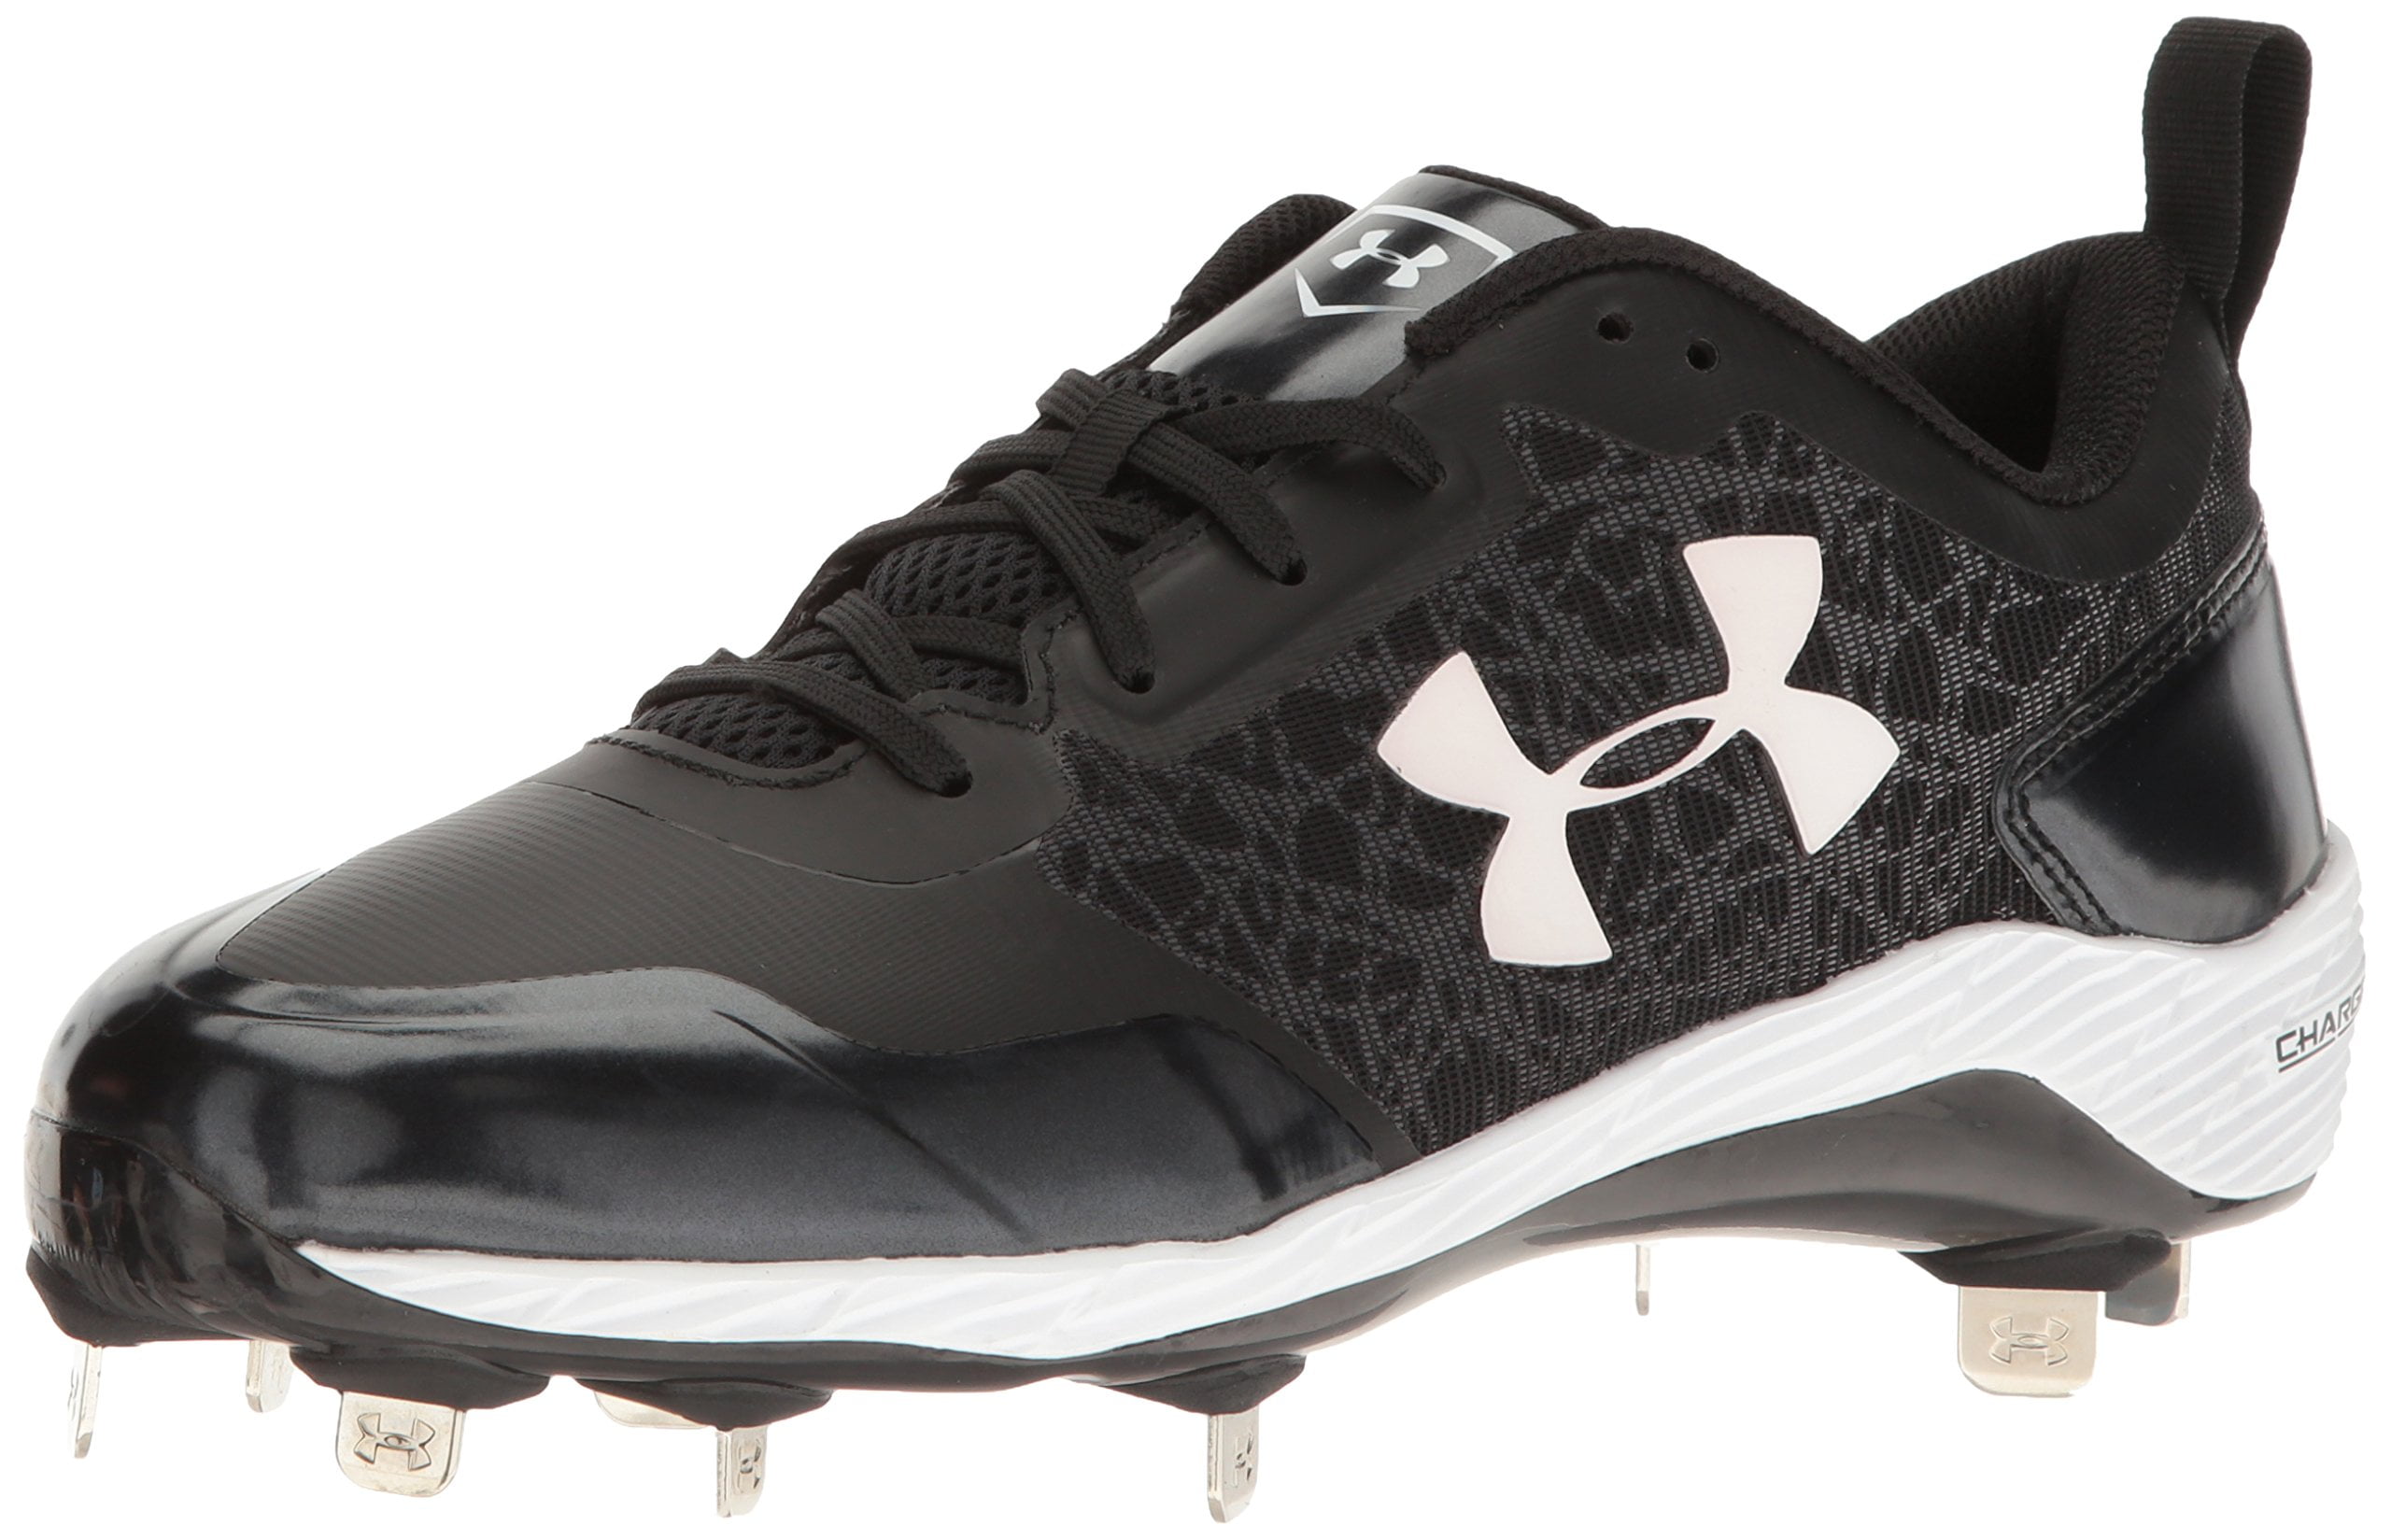 New Under Armour Yard Low ST Mens Metal Baseball Cleats Black White sz 16 $74.99 